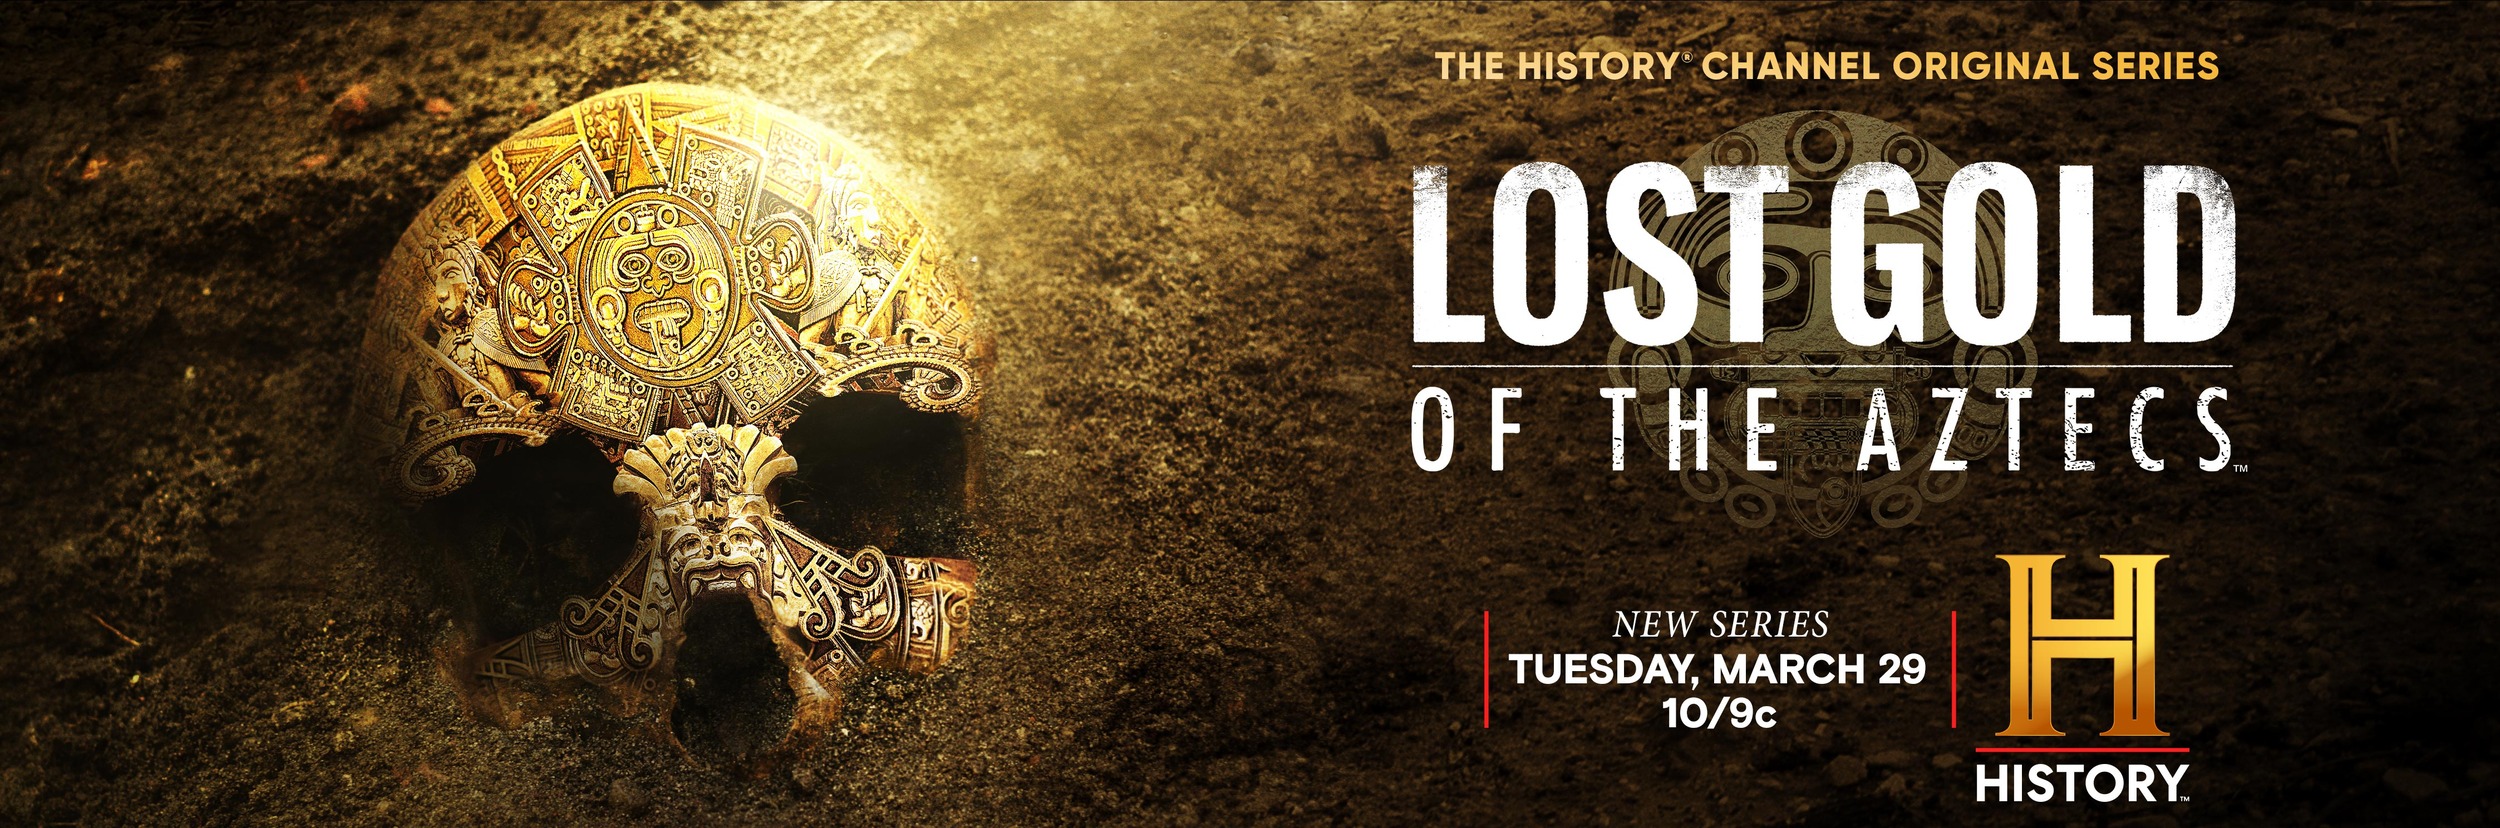 Mega Sized TV Poster Image for Lost Gold of the Aztecs (#2 of 2)